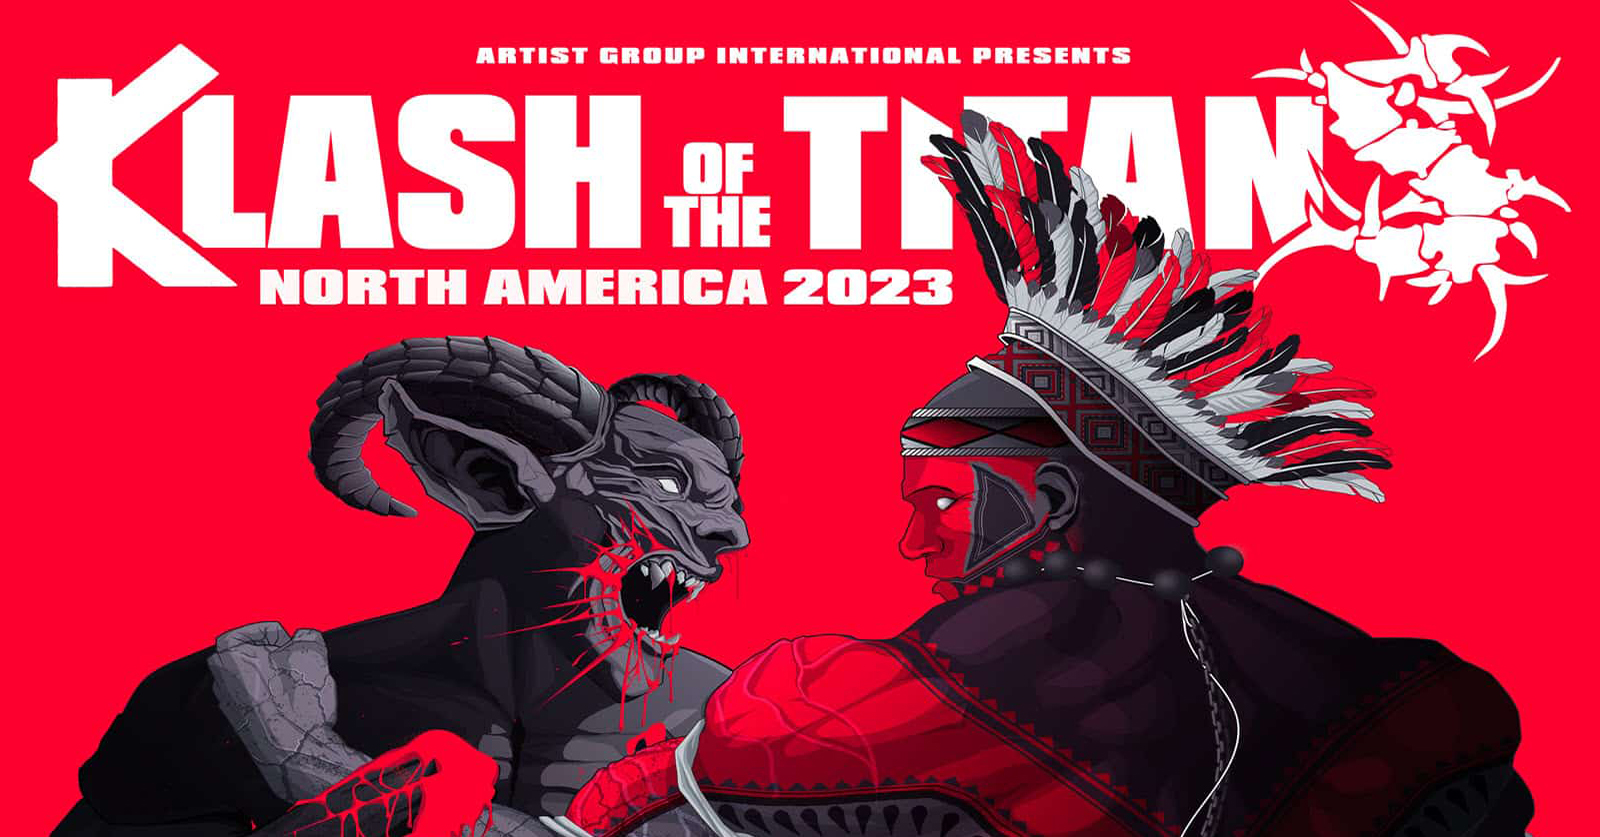 Klash of the Titans May 22, 2023 the House of Blues in Dallas, TX BPM